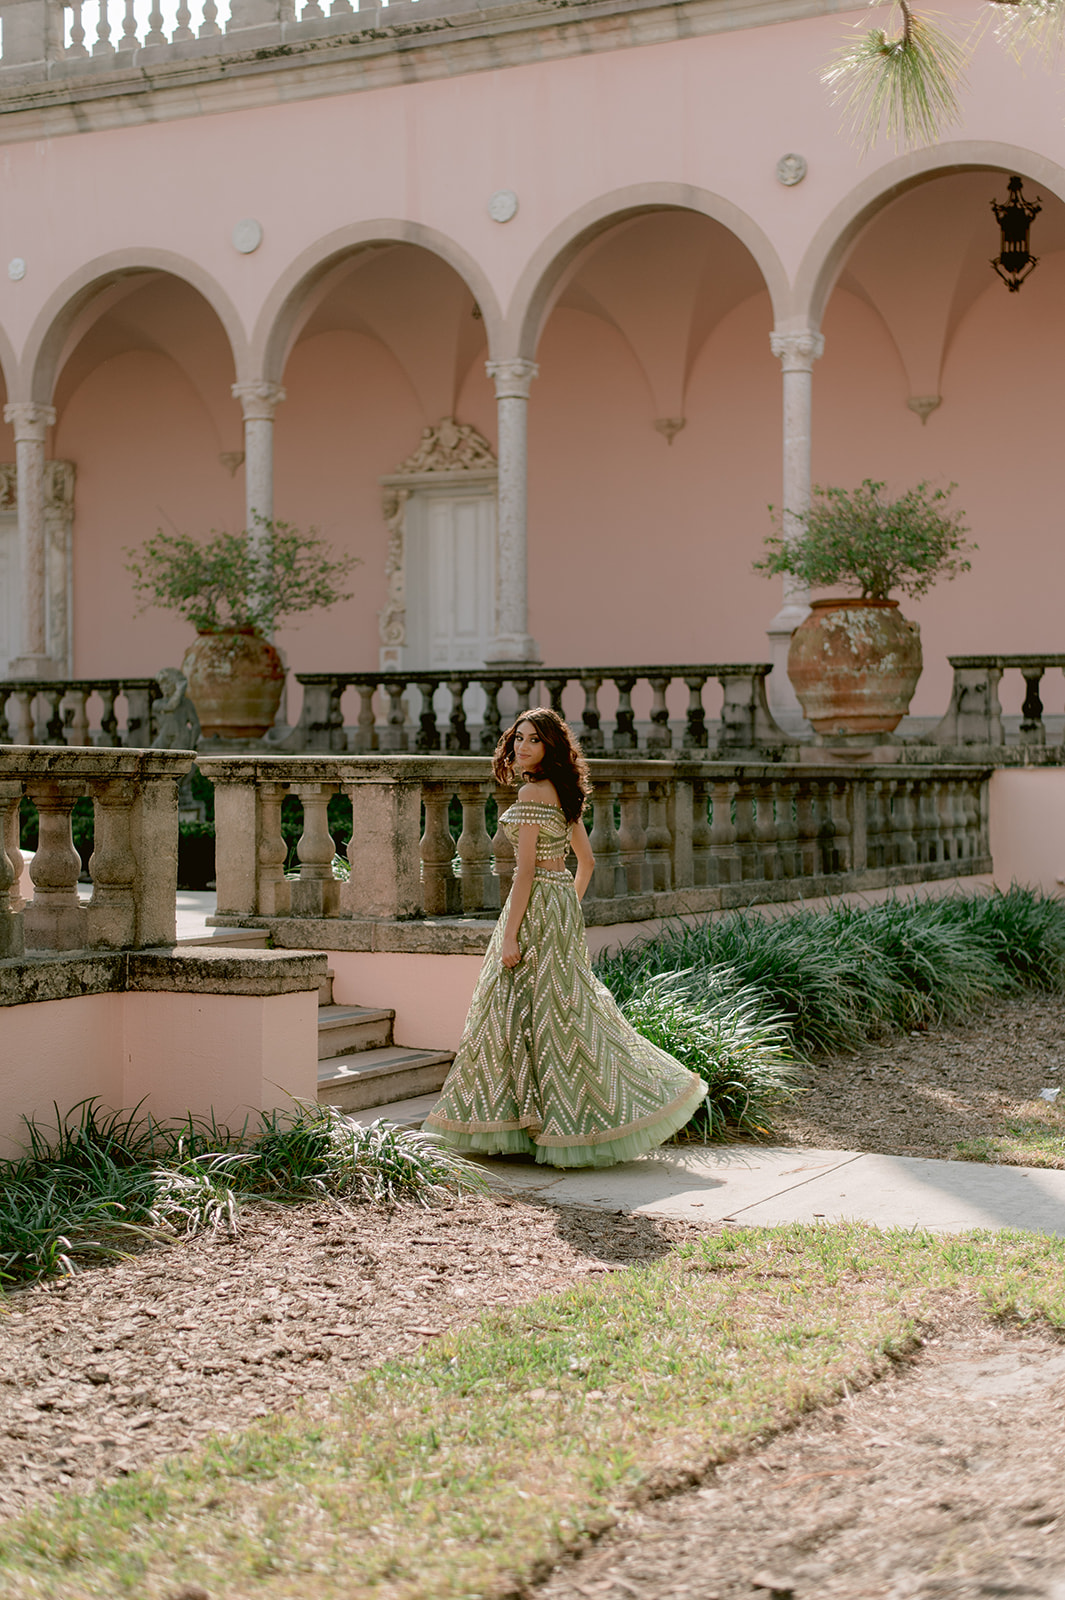 "Romantic engagement session with the Ringling Museum's Ca' d'Zan as a beautiful backdrop"
